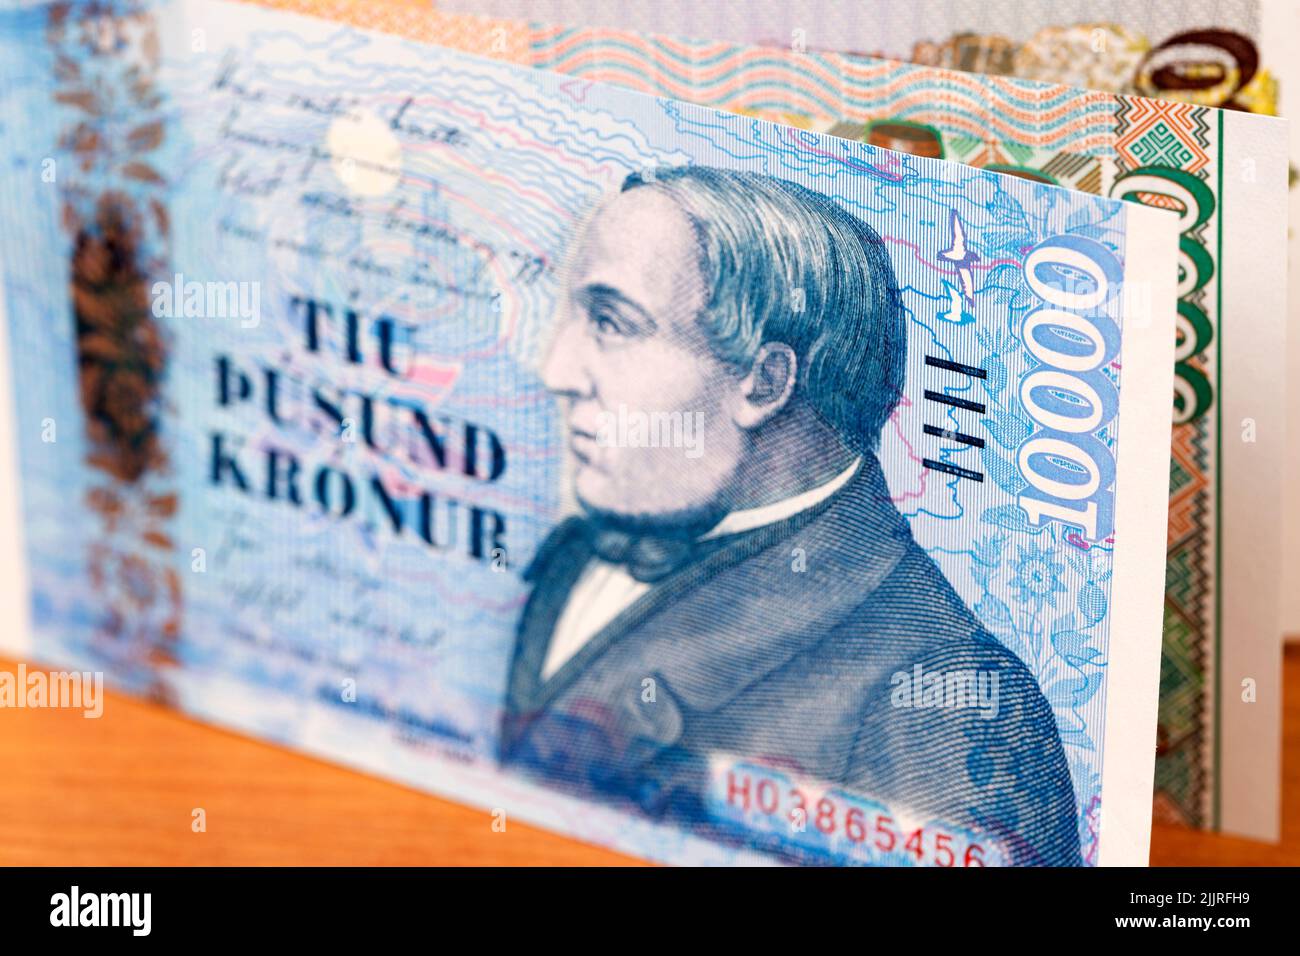 Icelandic money - crown a business background Stock Photo